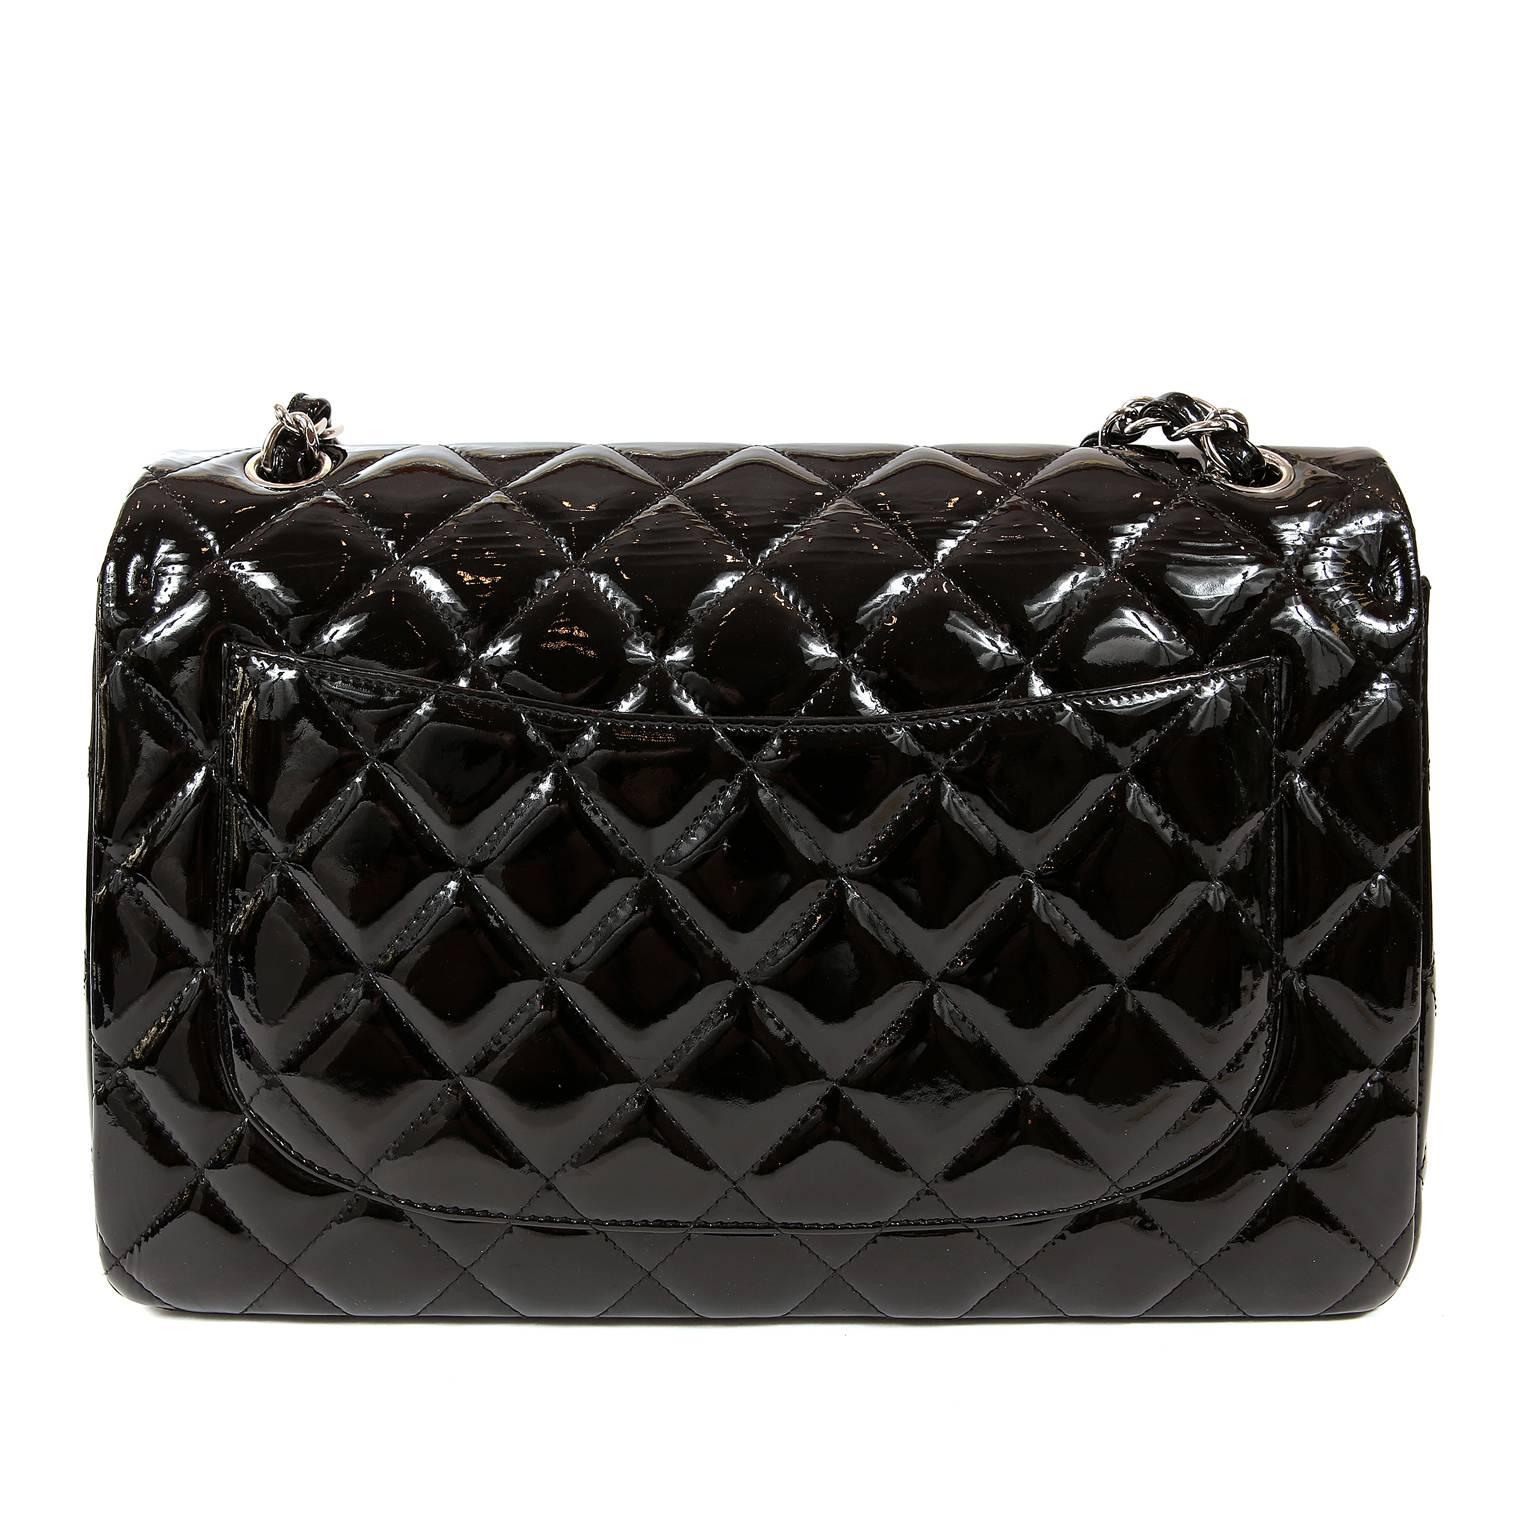 Chanel Black Patent Leather Jumbo Classic- Better than Excellent Condition
  The classic silhouette makes this coveted Chanel perfect for any occasion and a must have in any wardrobe. 
Black durable patent leather is quilted in signature Chanel